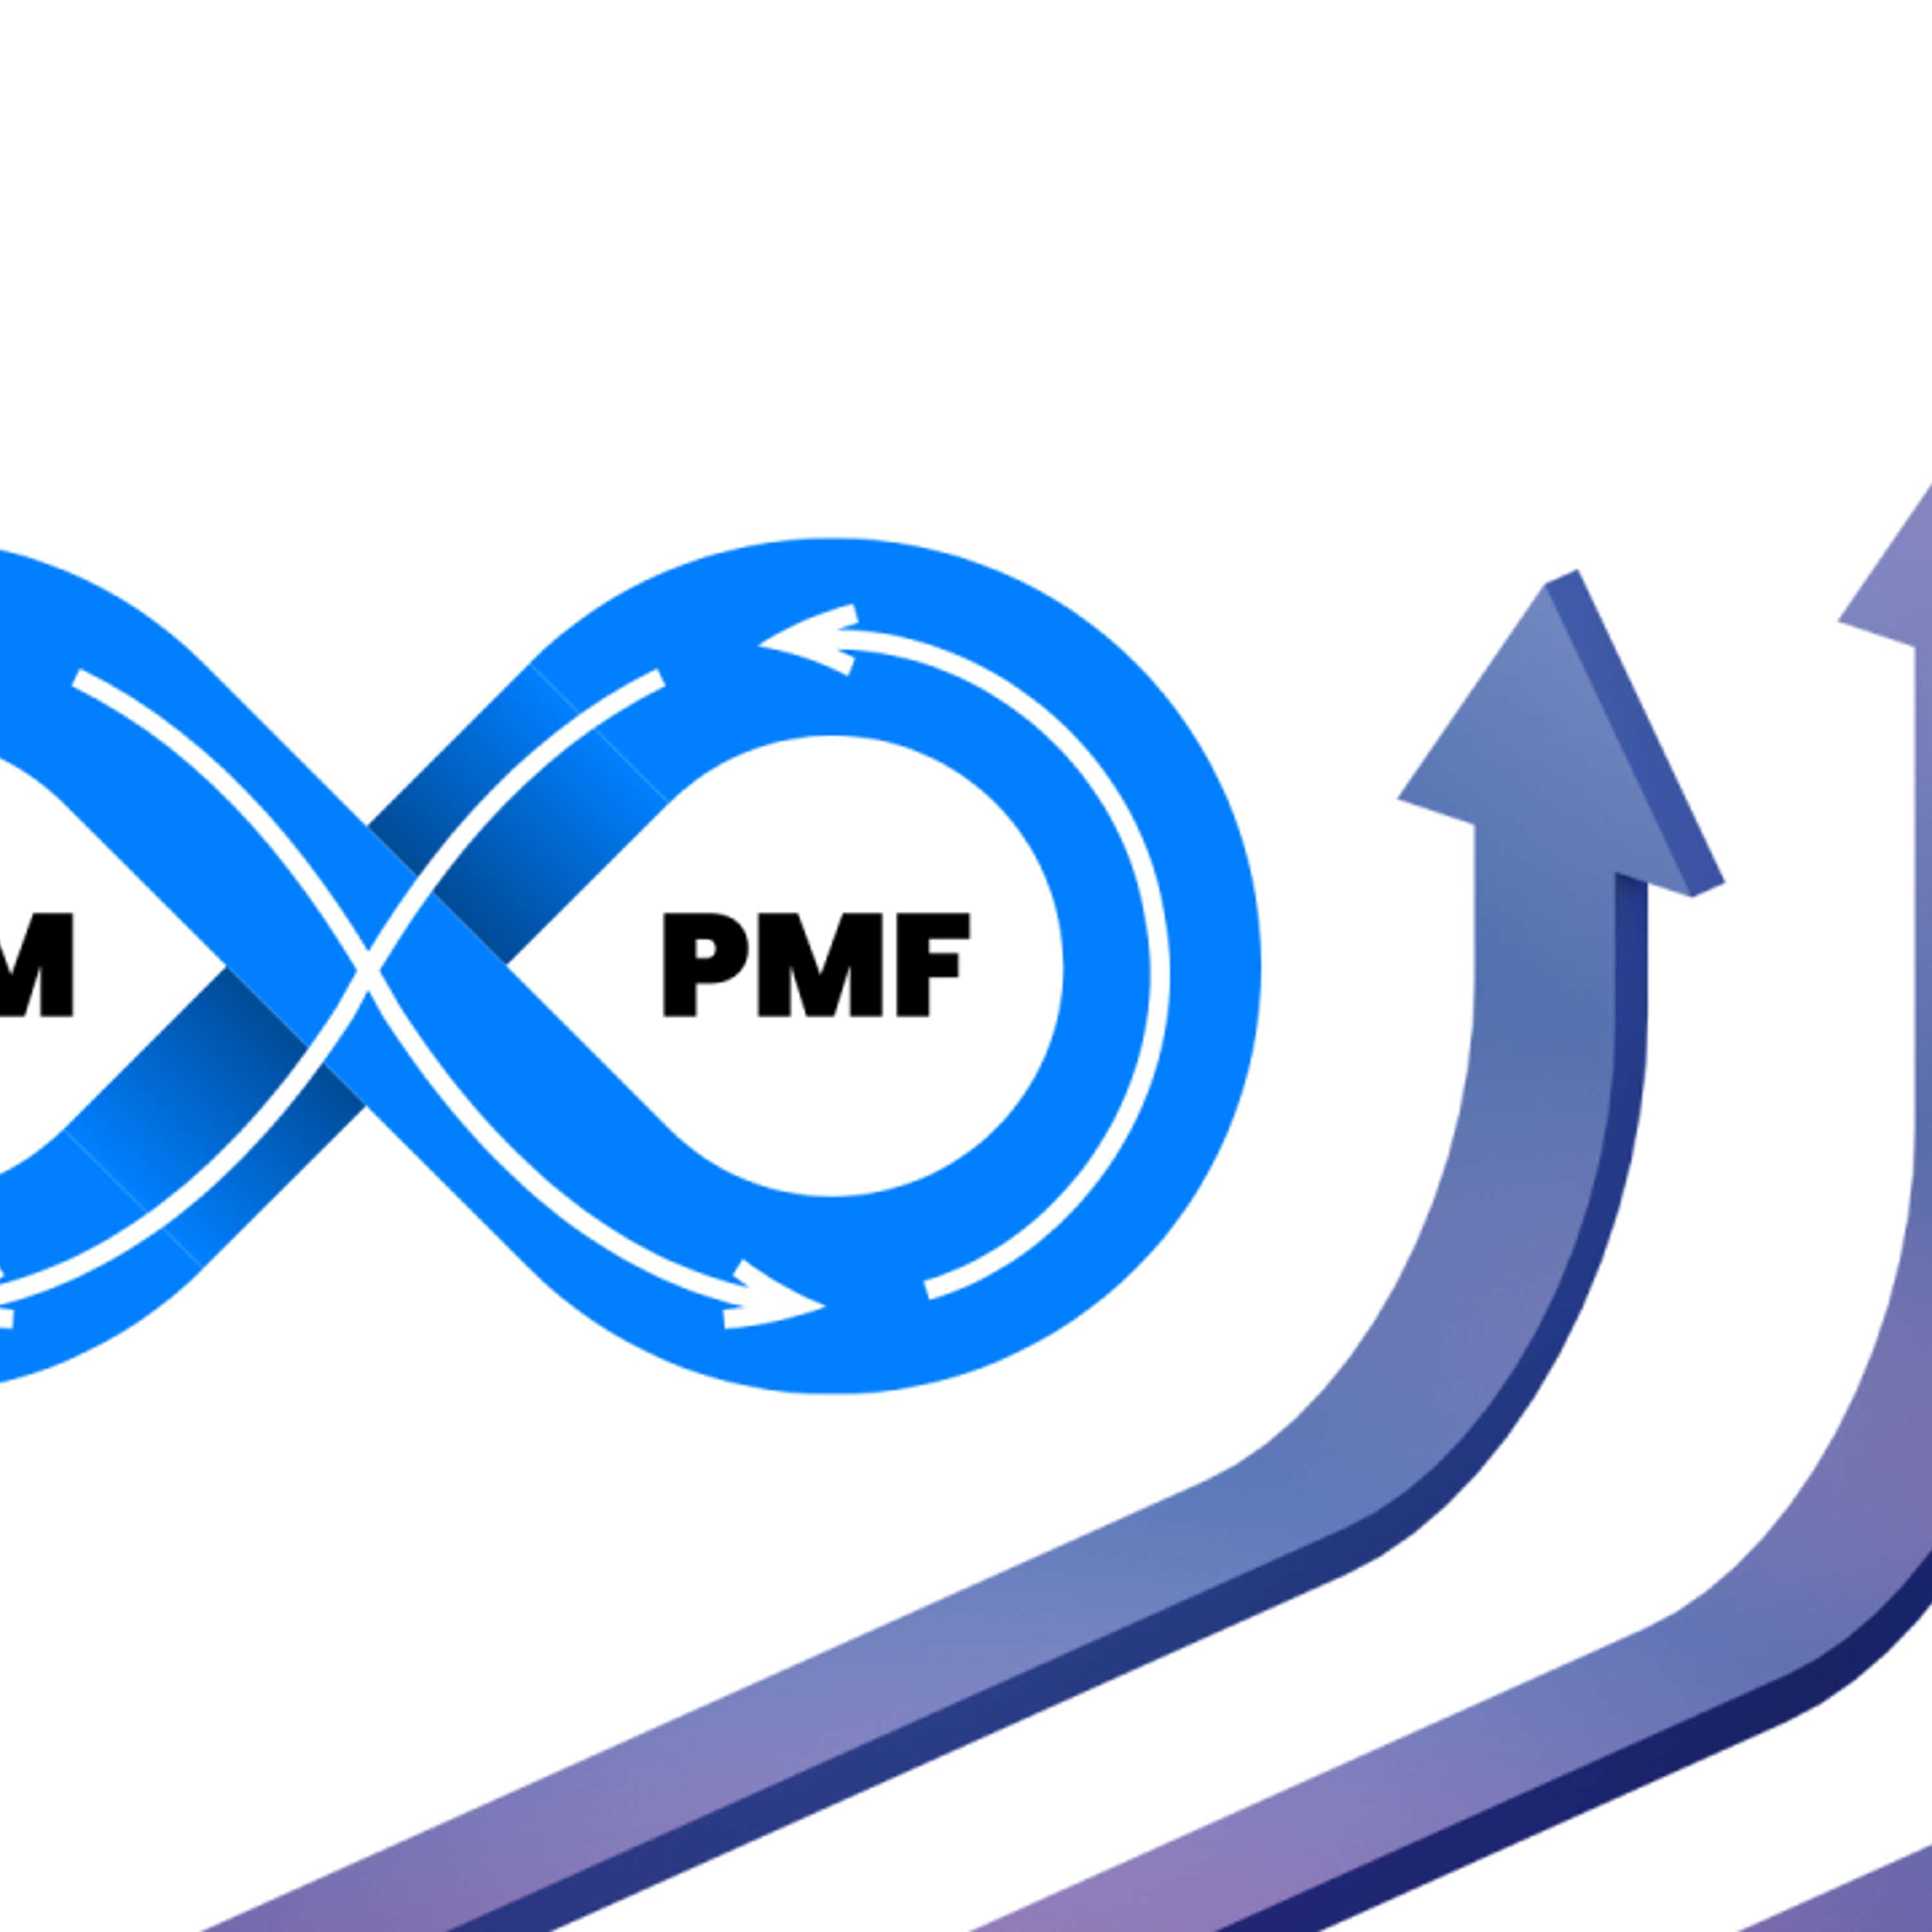 Web3 Project Engagements: Is Your Project Still Far Away From Achieving PMF?